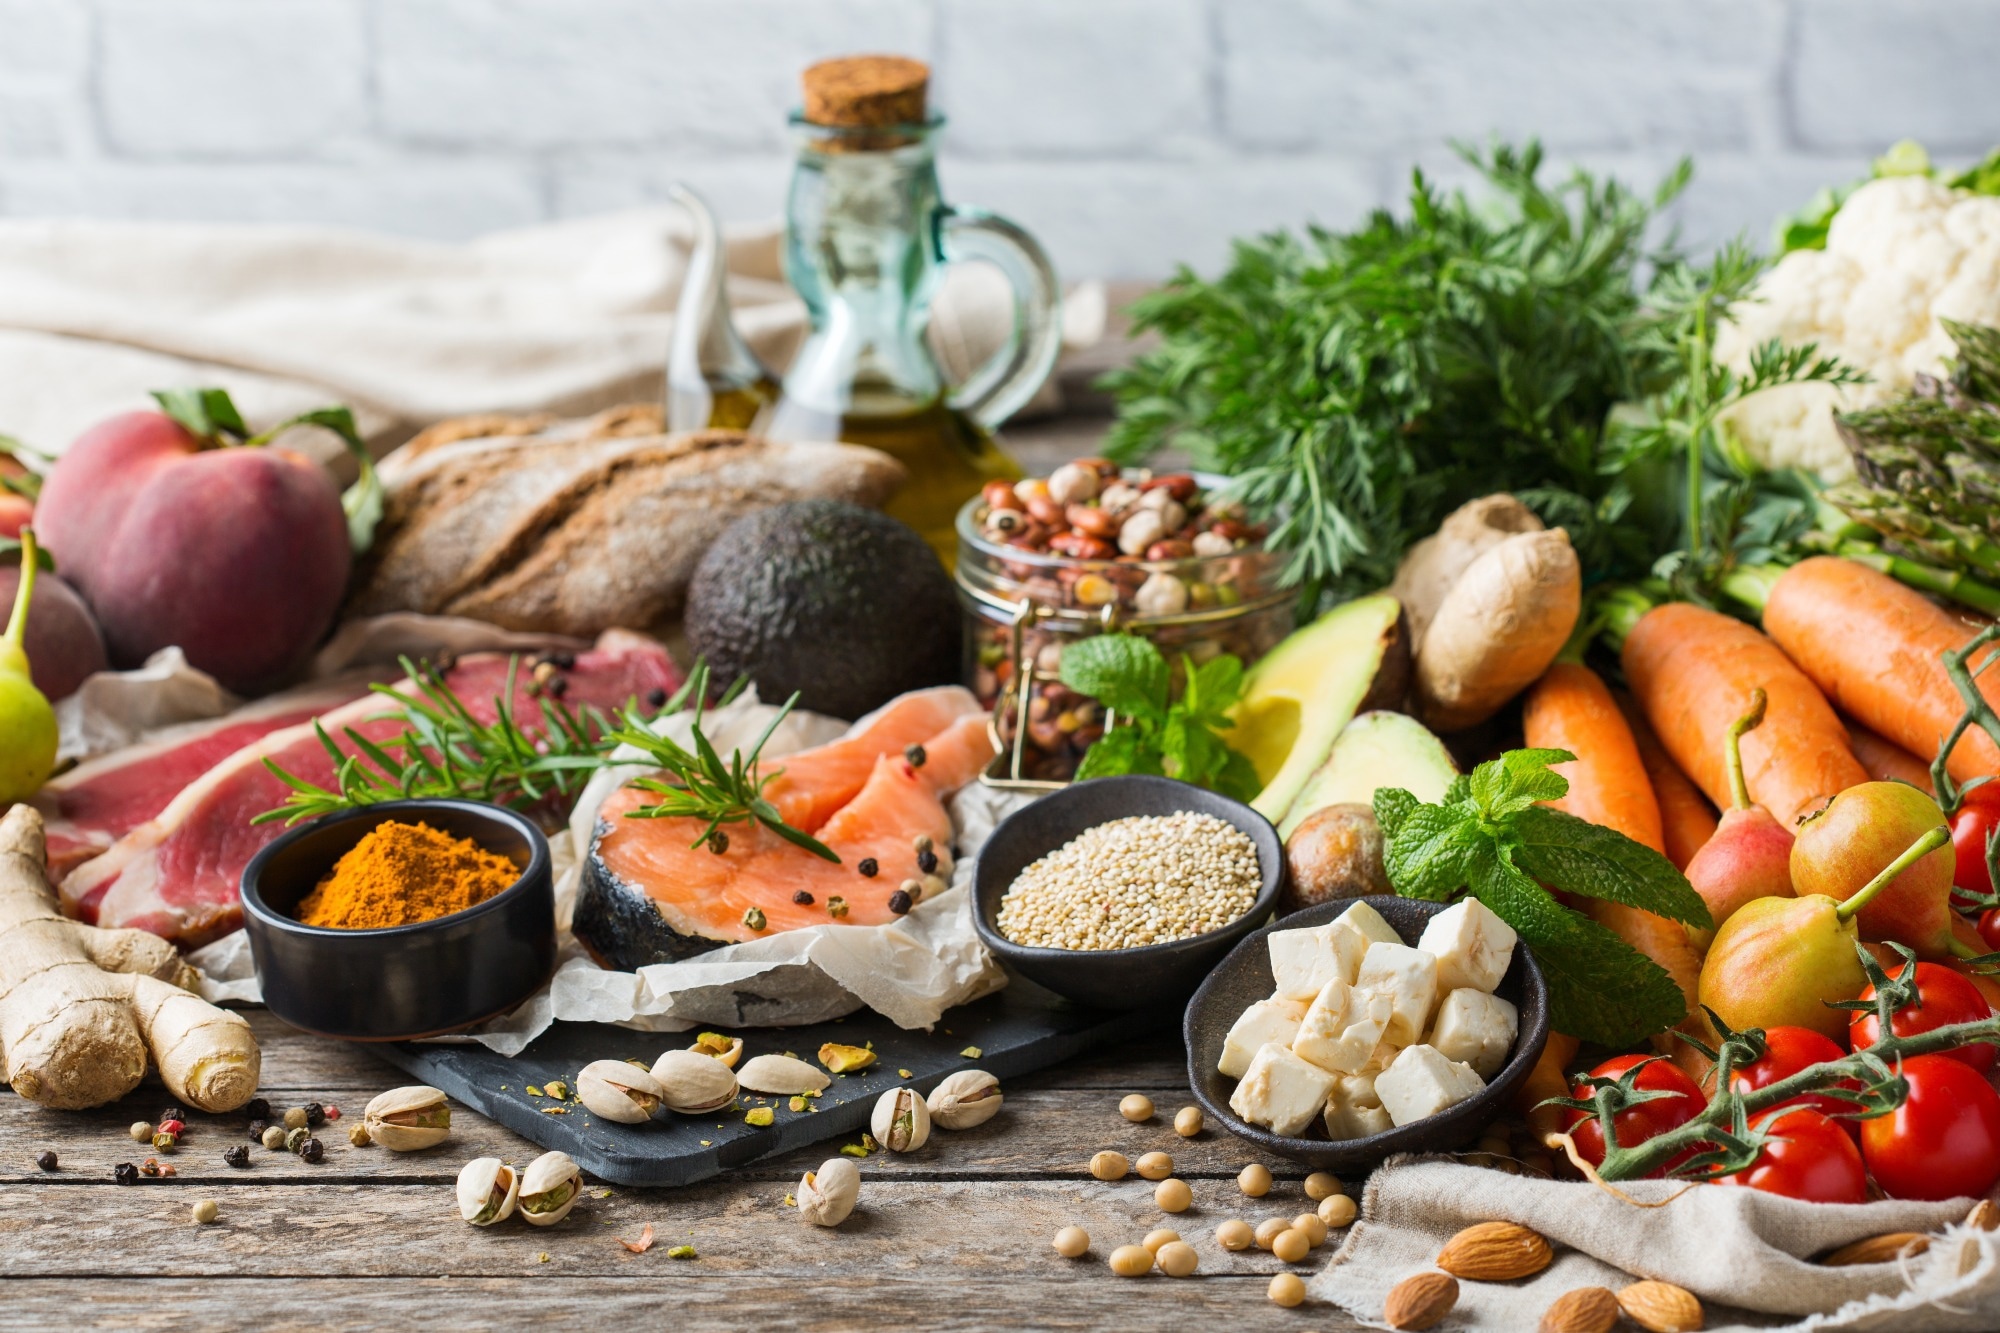 Evaluating the association between Mediterranean Diet adherence and type 2 diabetes using nutritional biomarkers